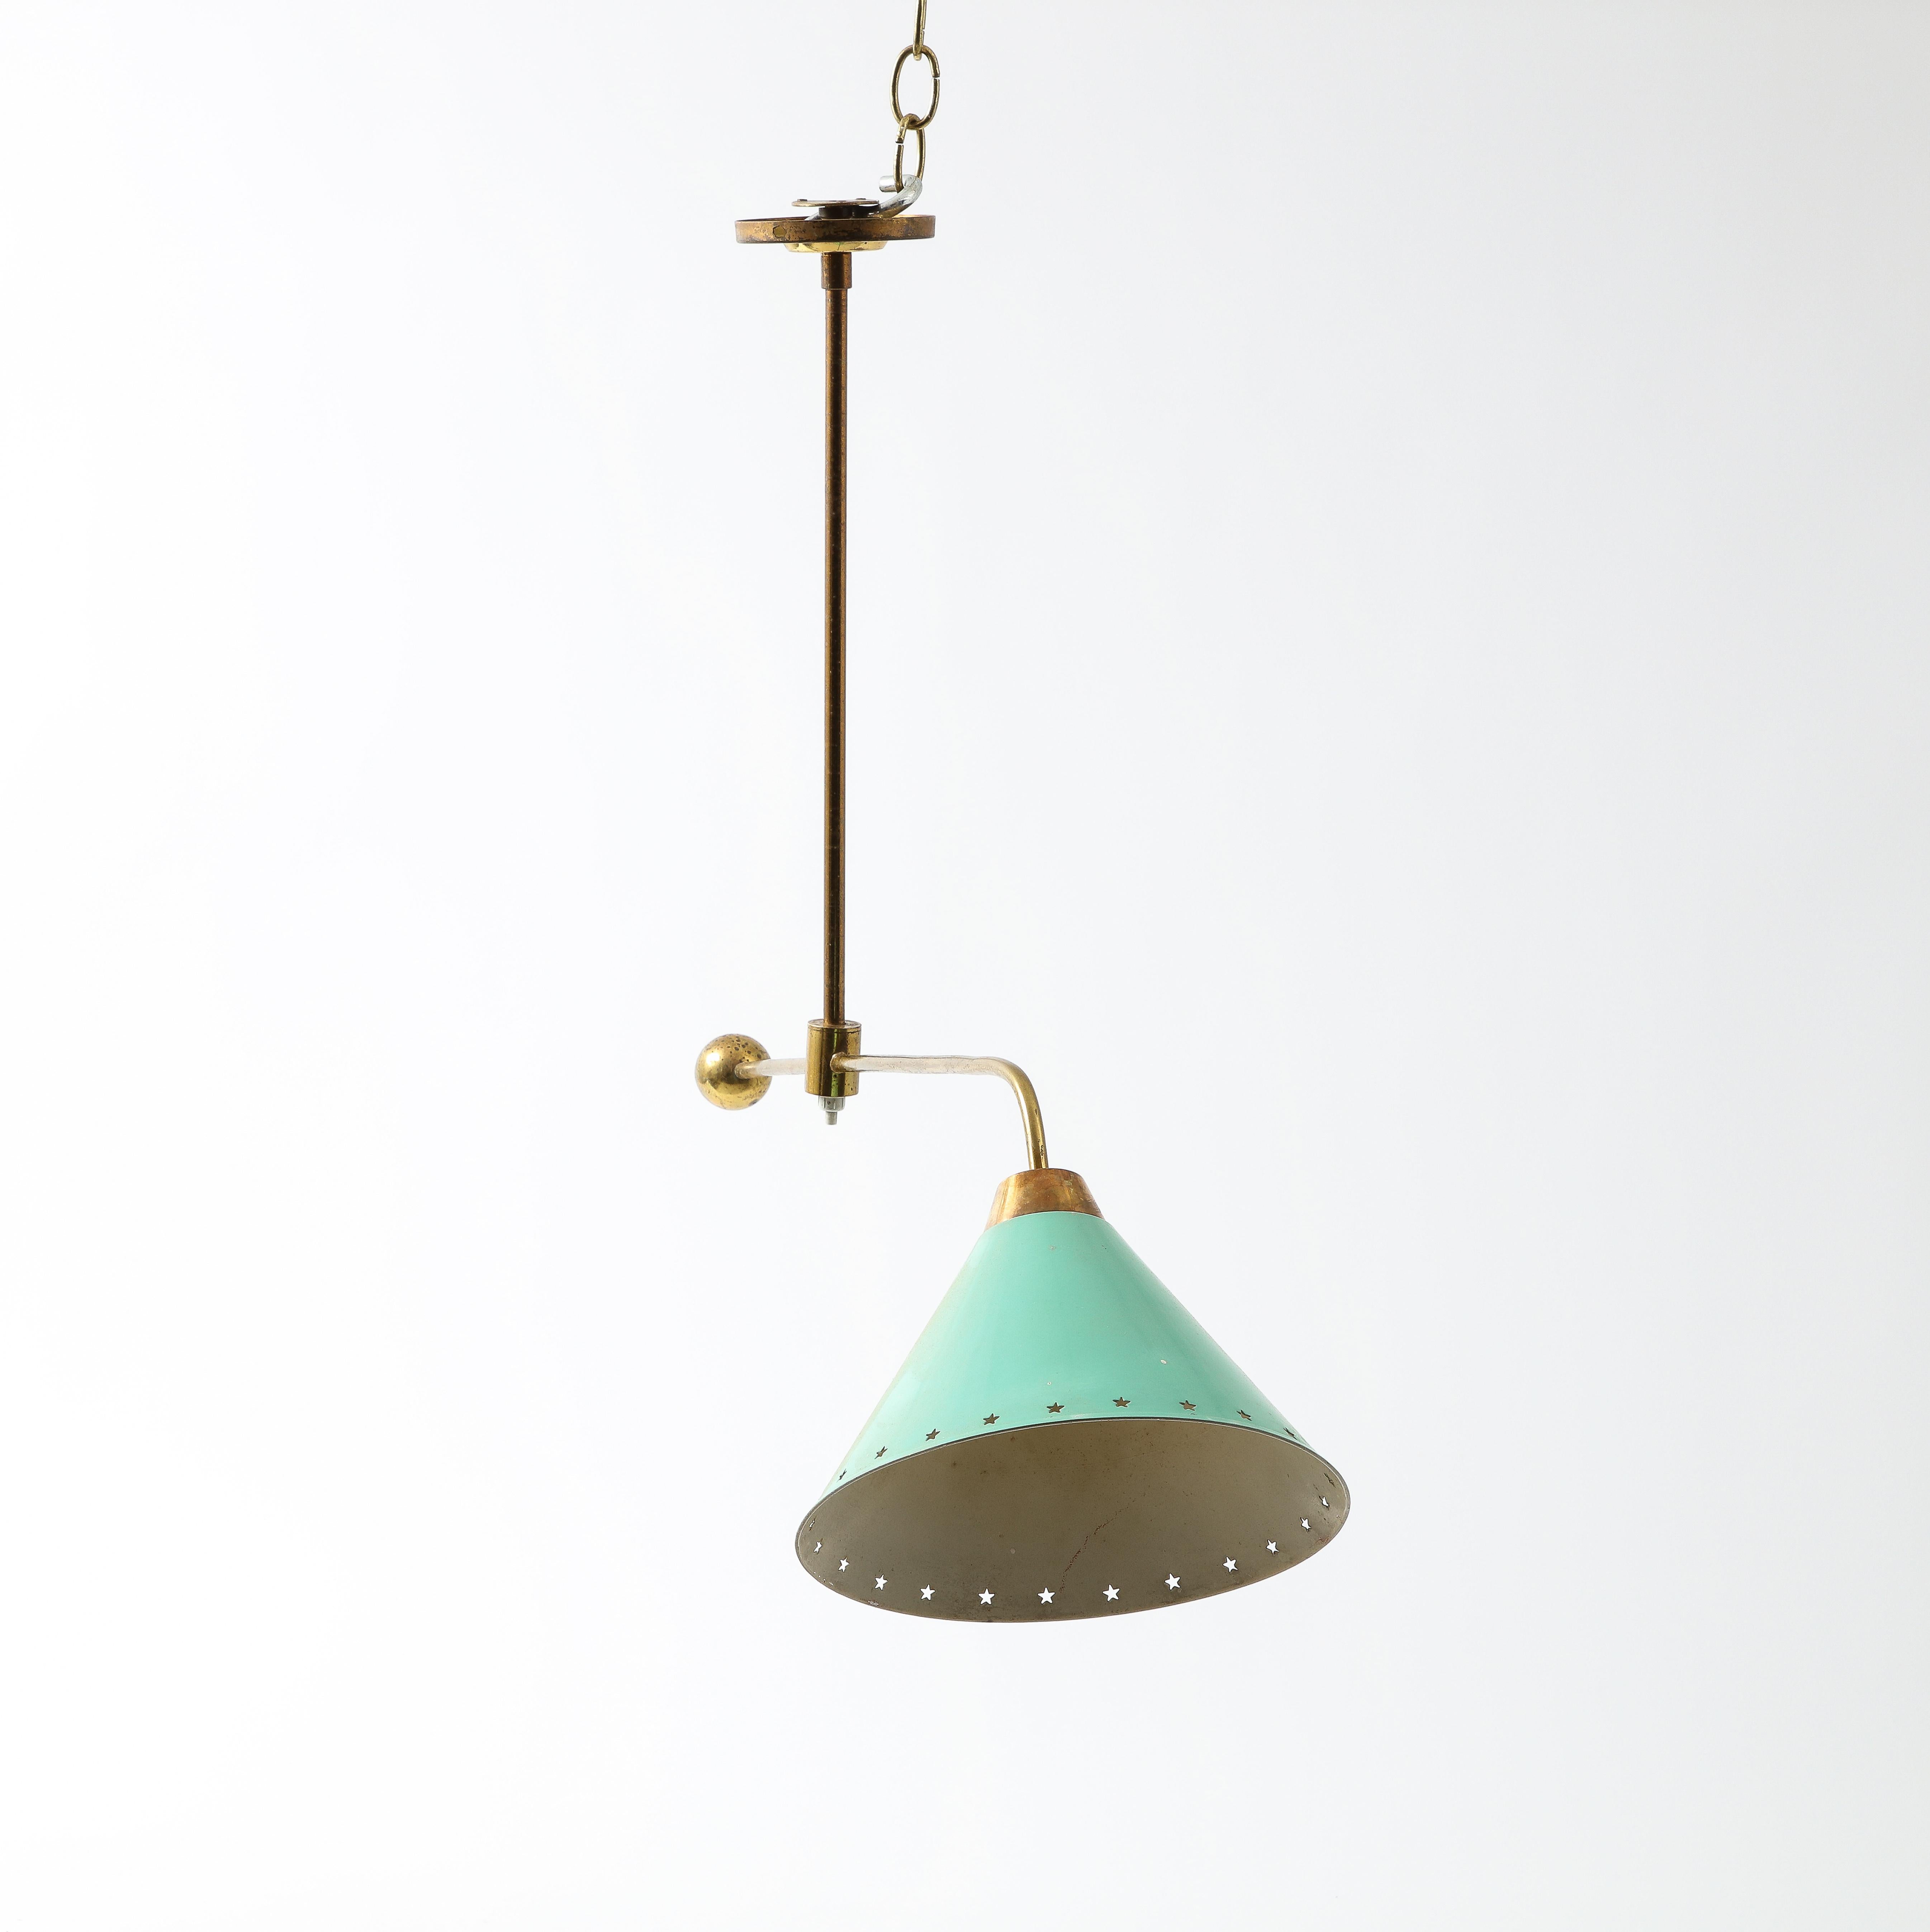 Arlus Brass Asymmetrical Ceiling Fixture with Green Shade, France 1960's For Sale 4